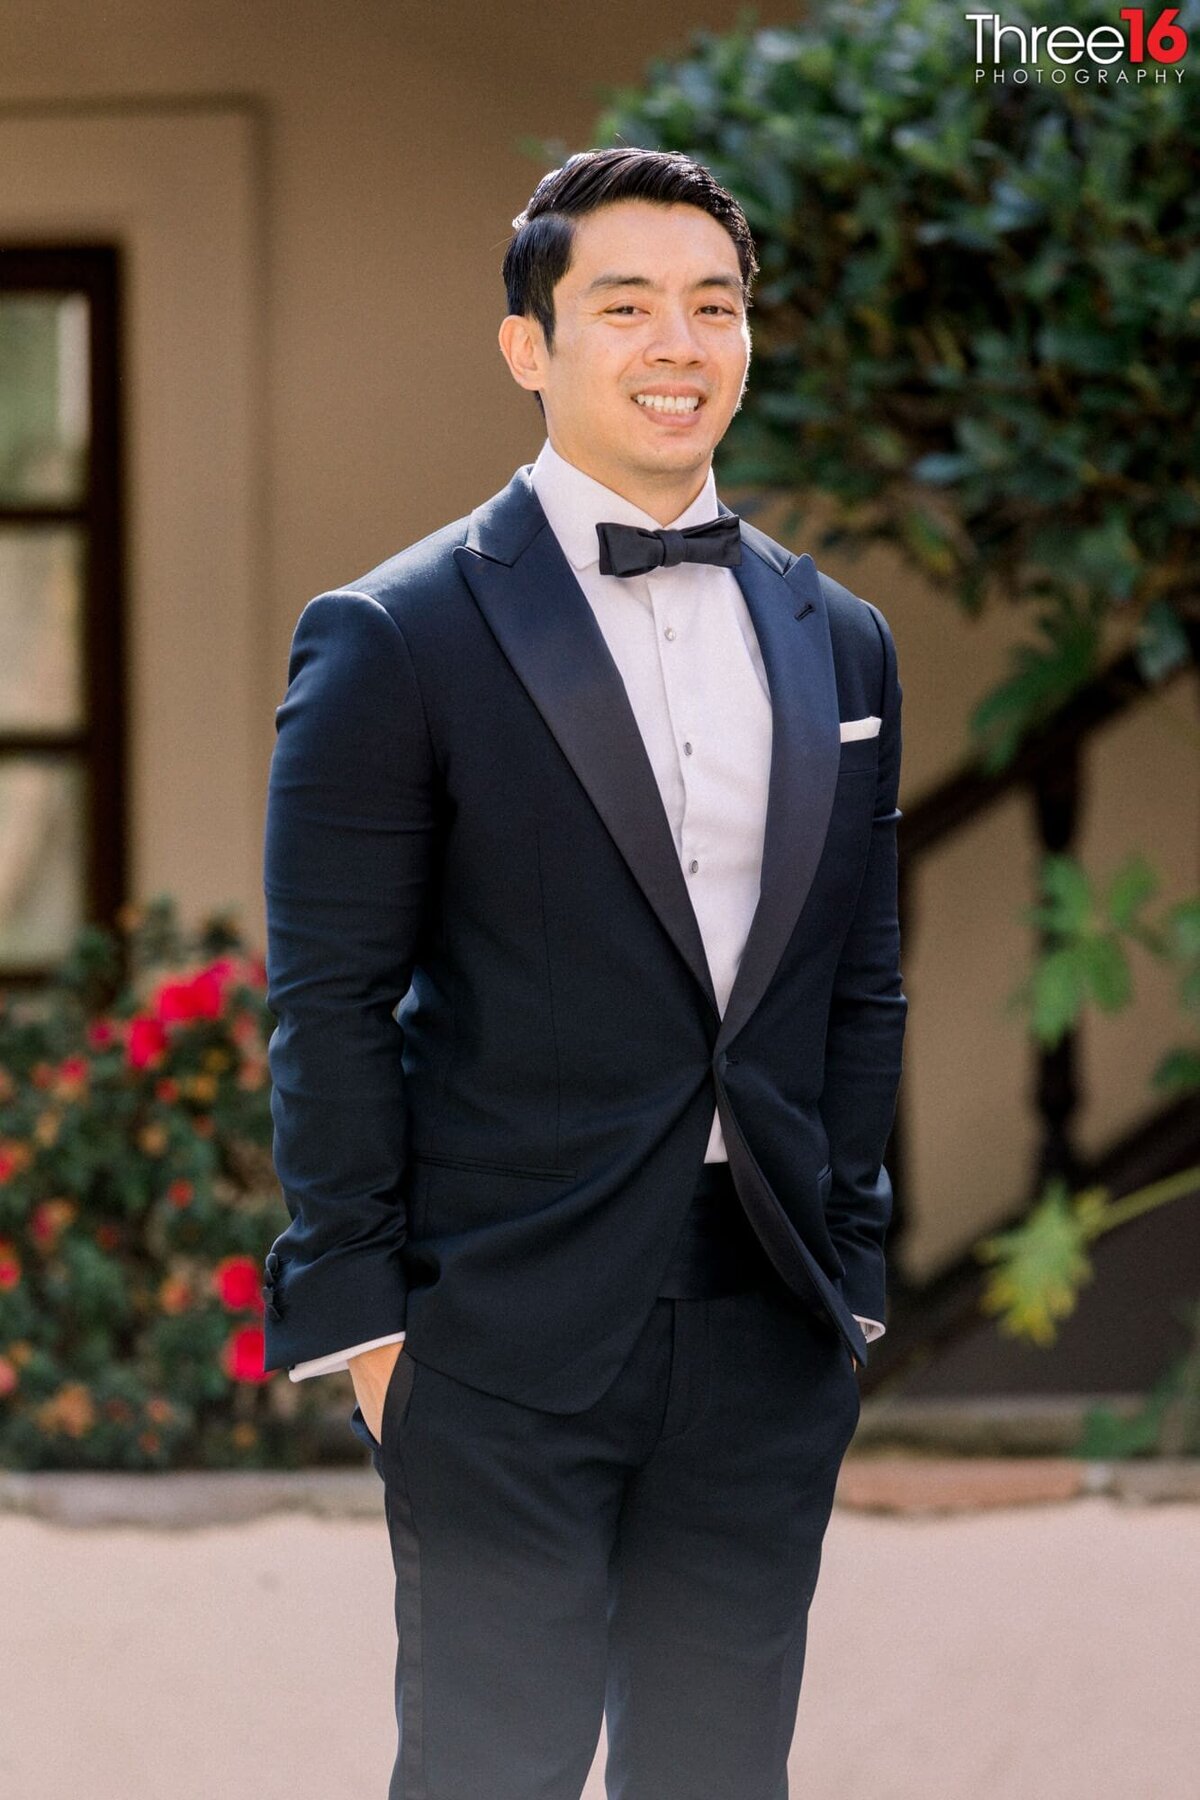 Groom poses in his tux and smiles before his wedding ceremony